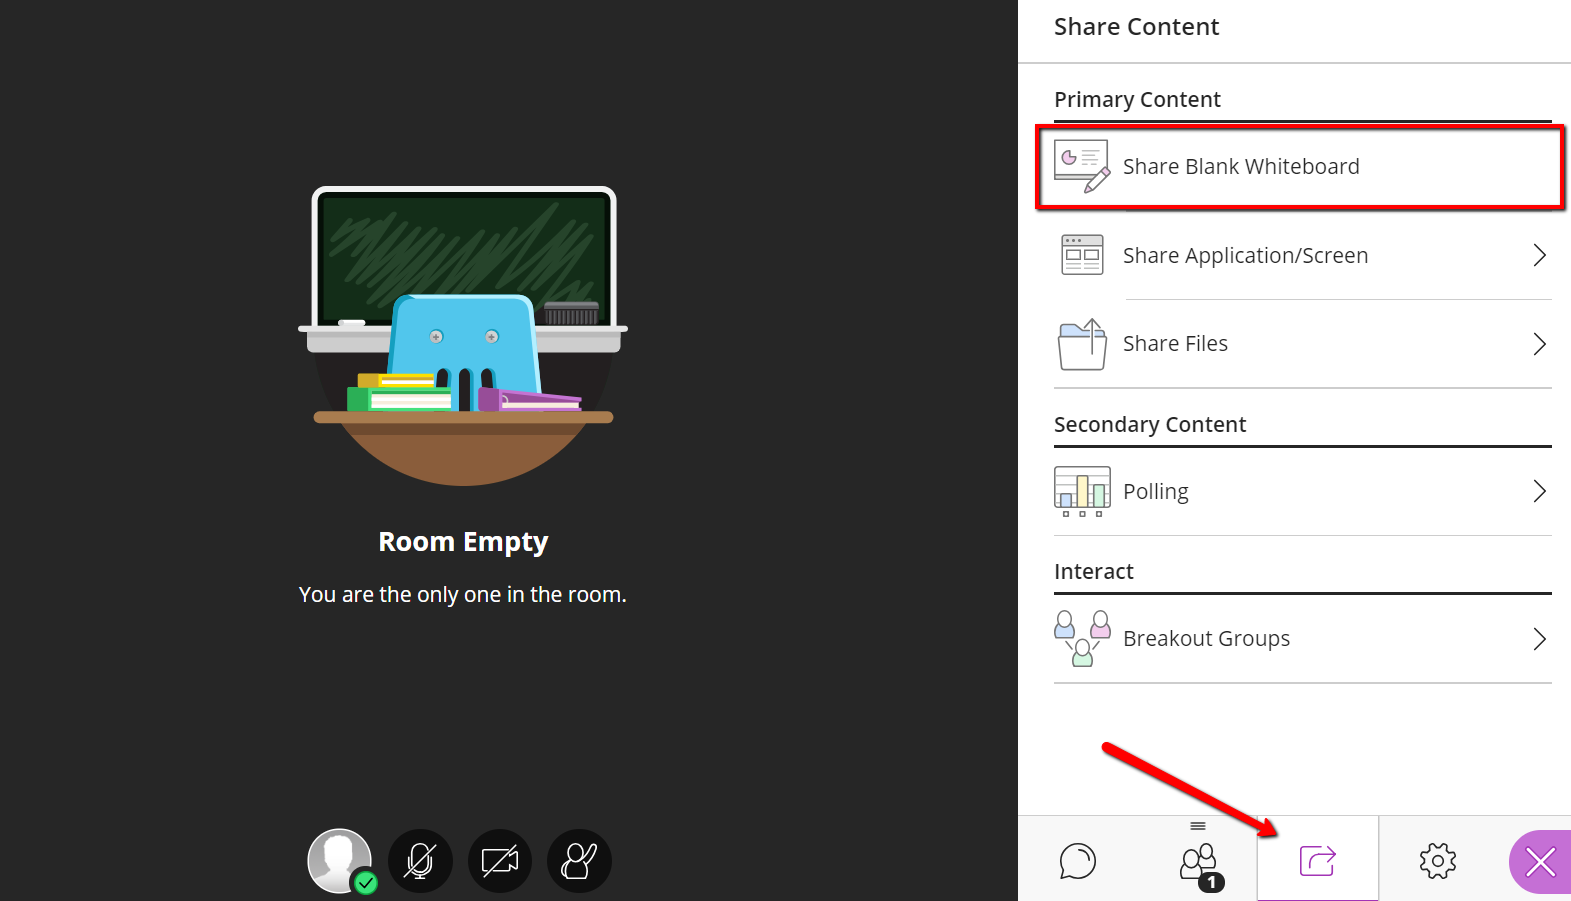 Screen capture of the "Share" tool with Share Blank Whiteboard highlighted